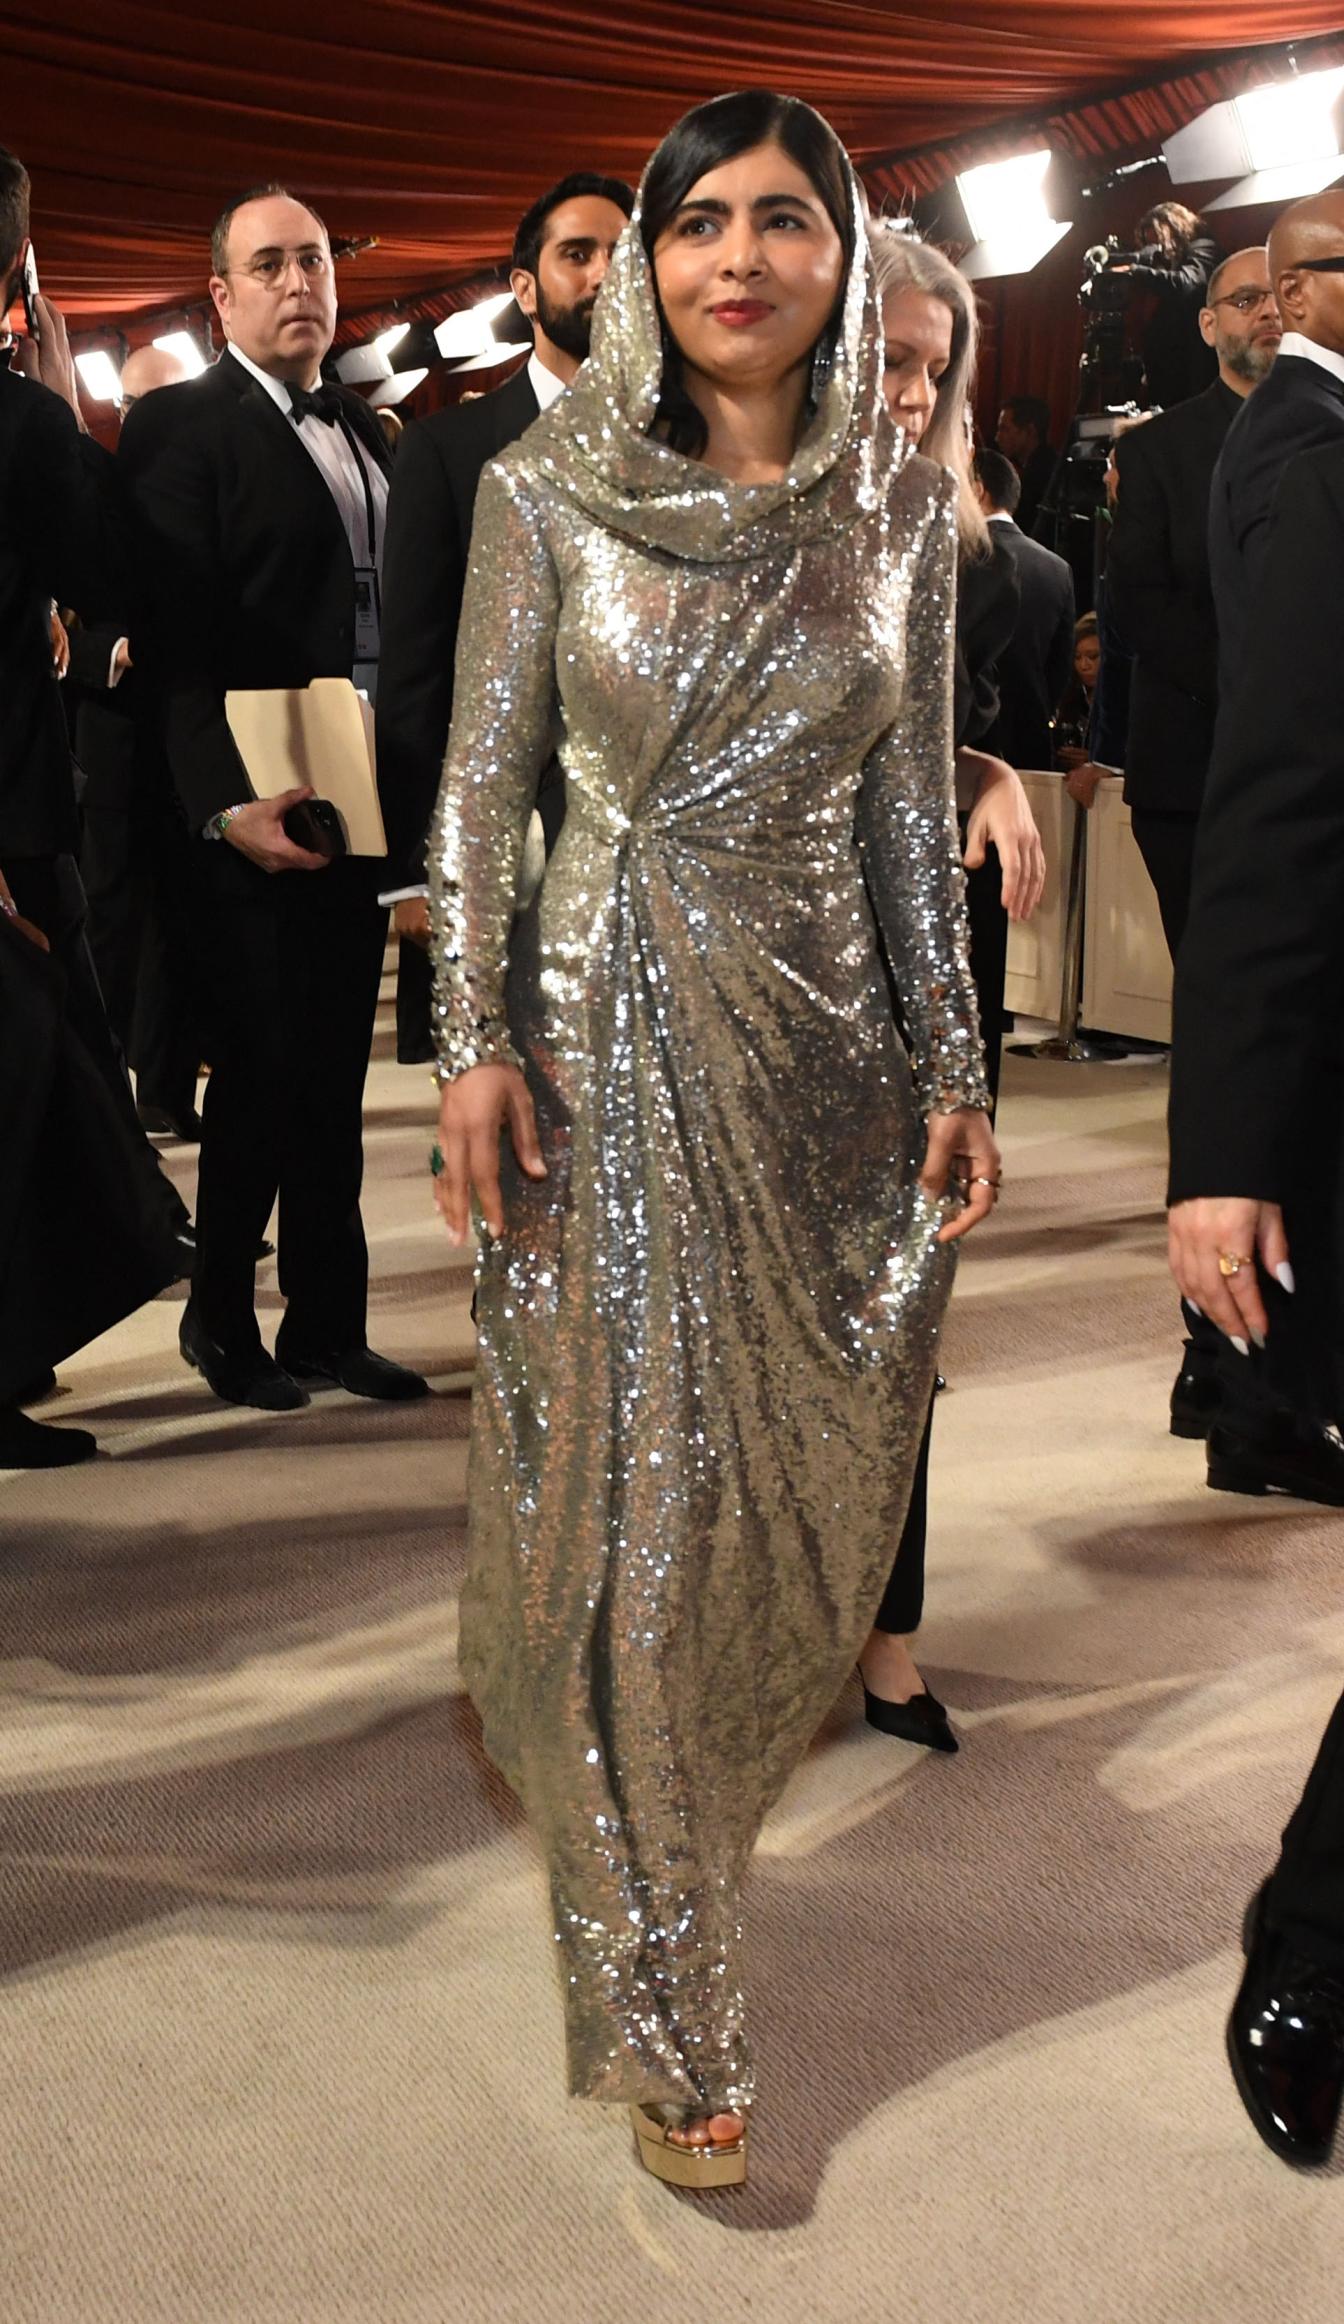 Pakistani activist Malala Yousafzai attends the 95th Annual Academy Awards at the Dolby Theatre in Hollywood